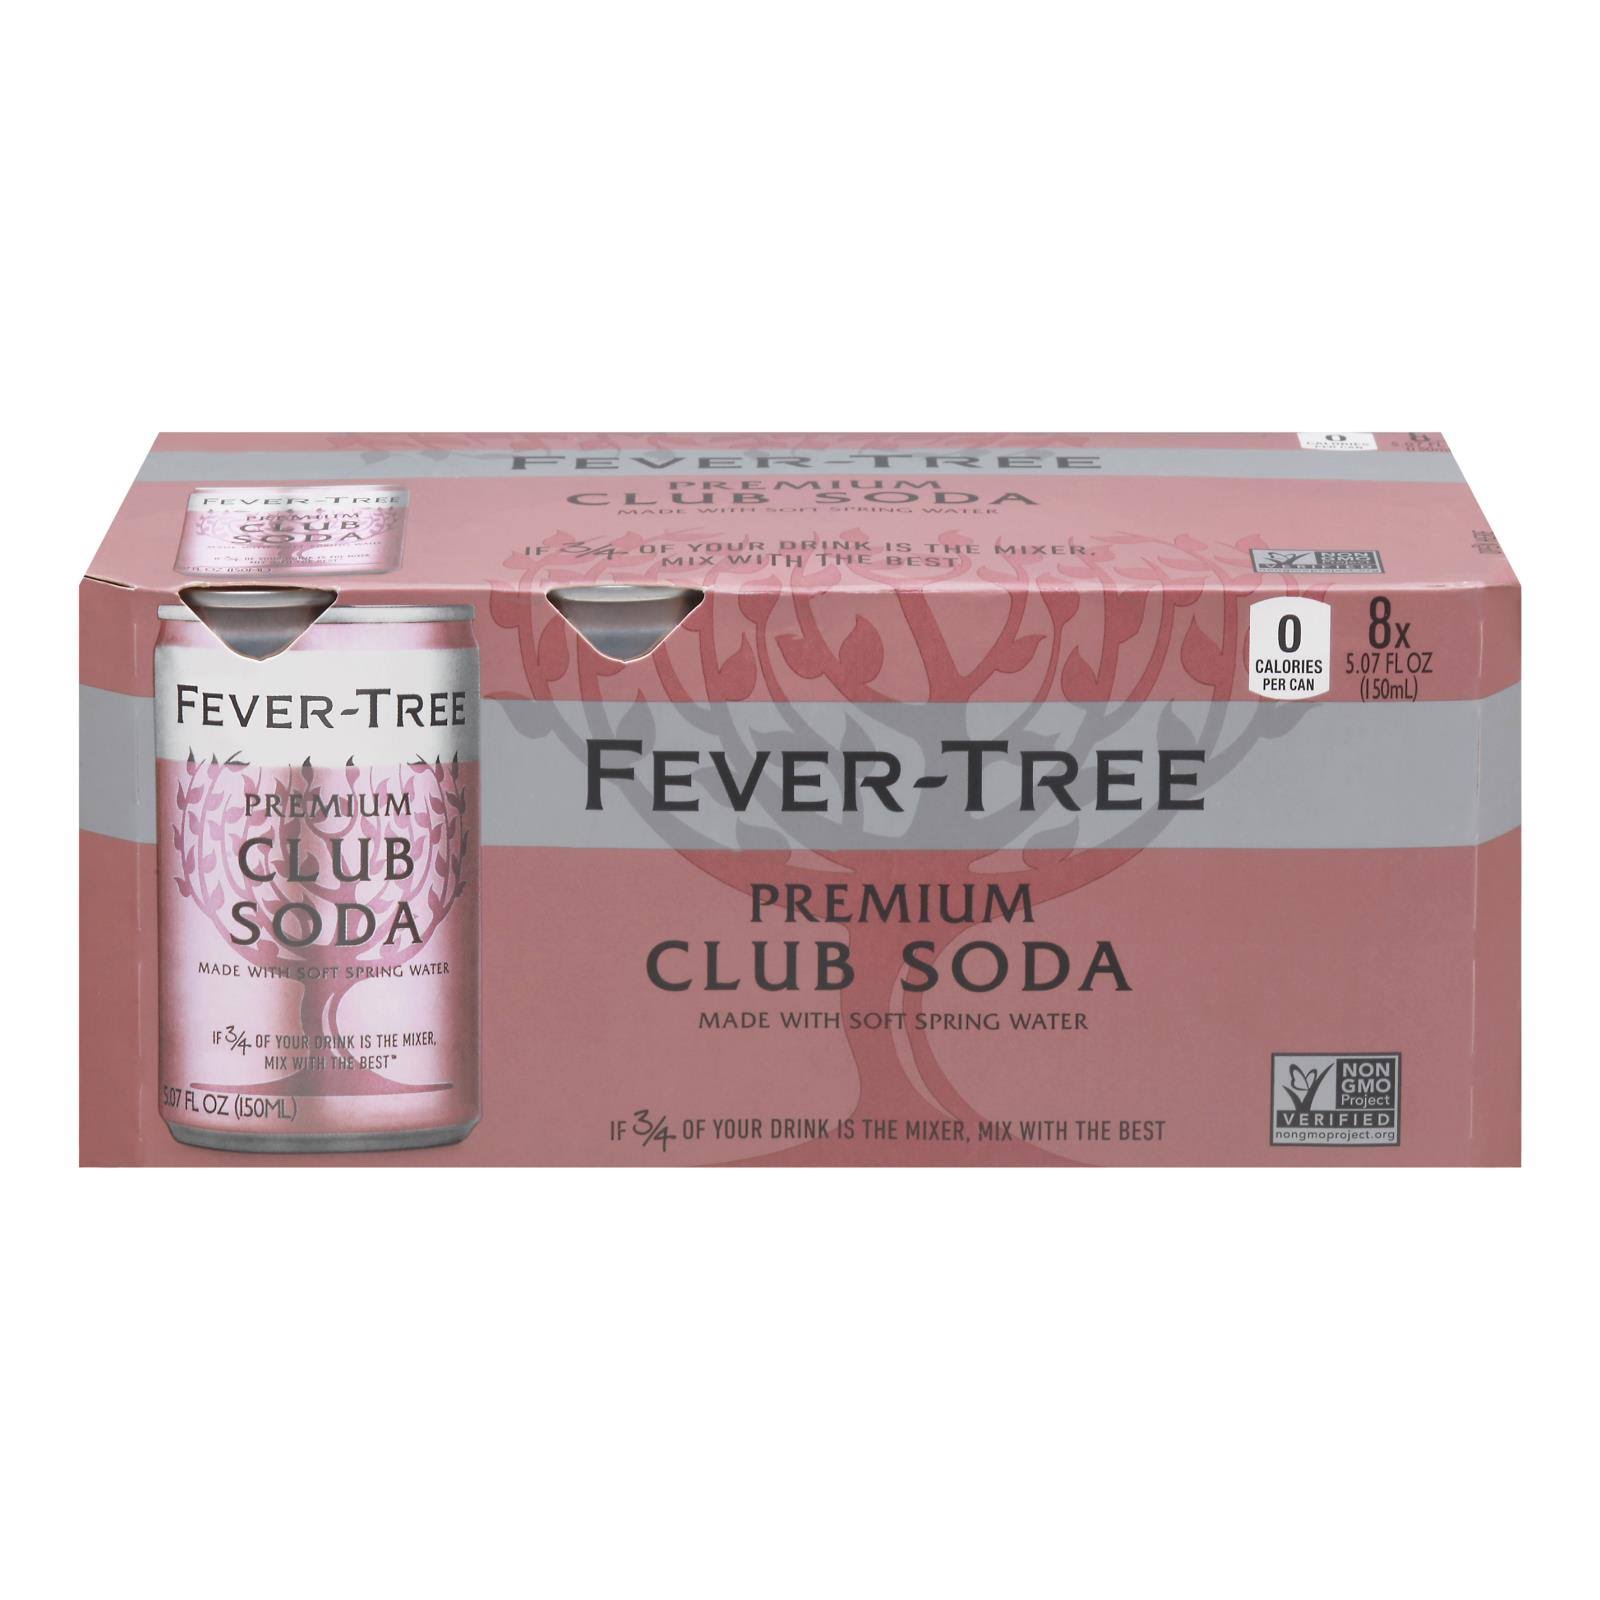 Fever-Tree - Club Soda Cans - Case of 3-8/5.07FZ